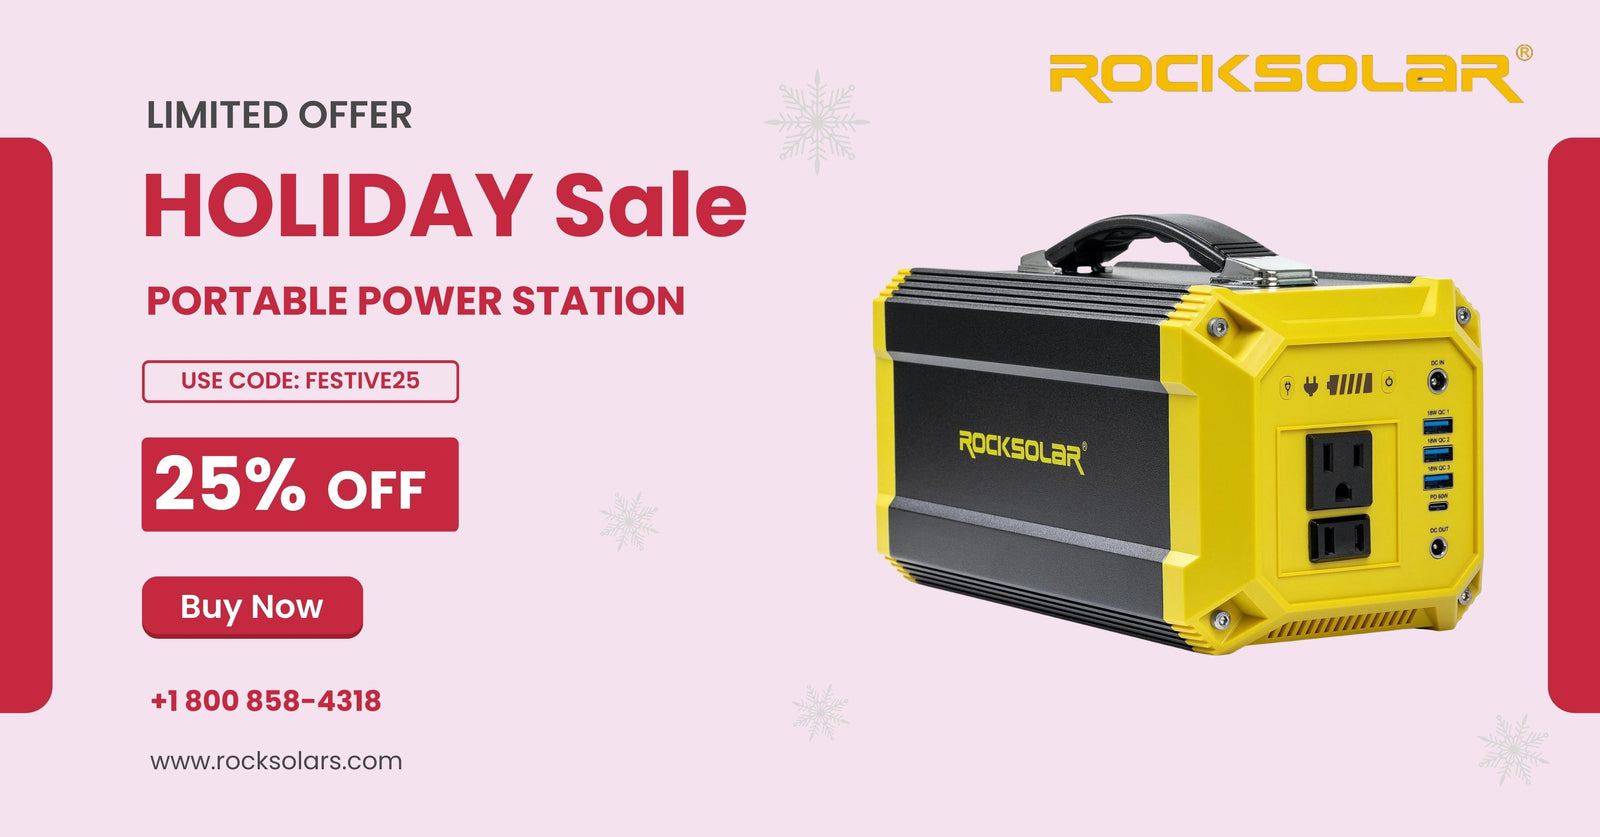 HOLIDAY SALE OFFERS ON PORTABLE POWER STATIONS!